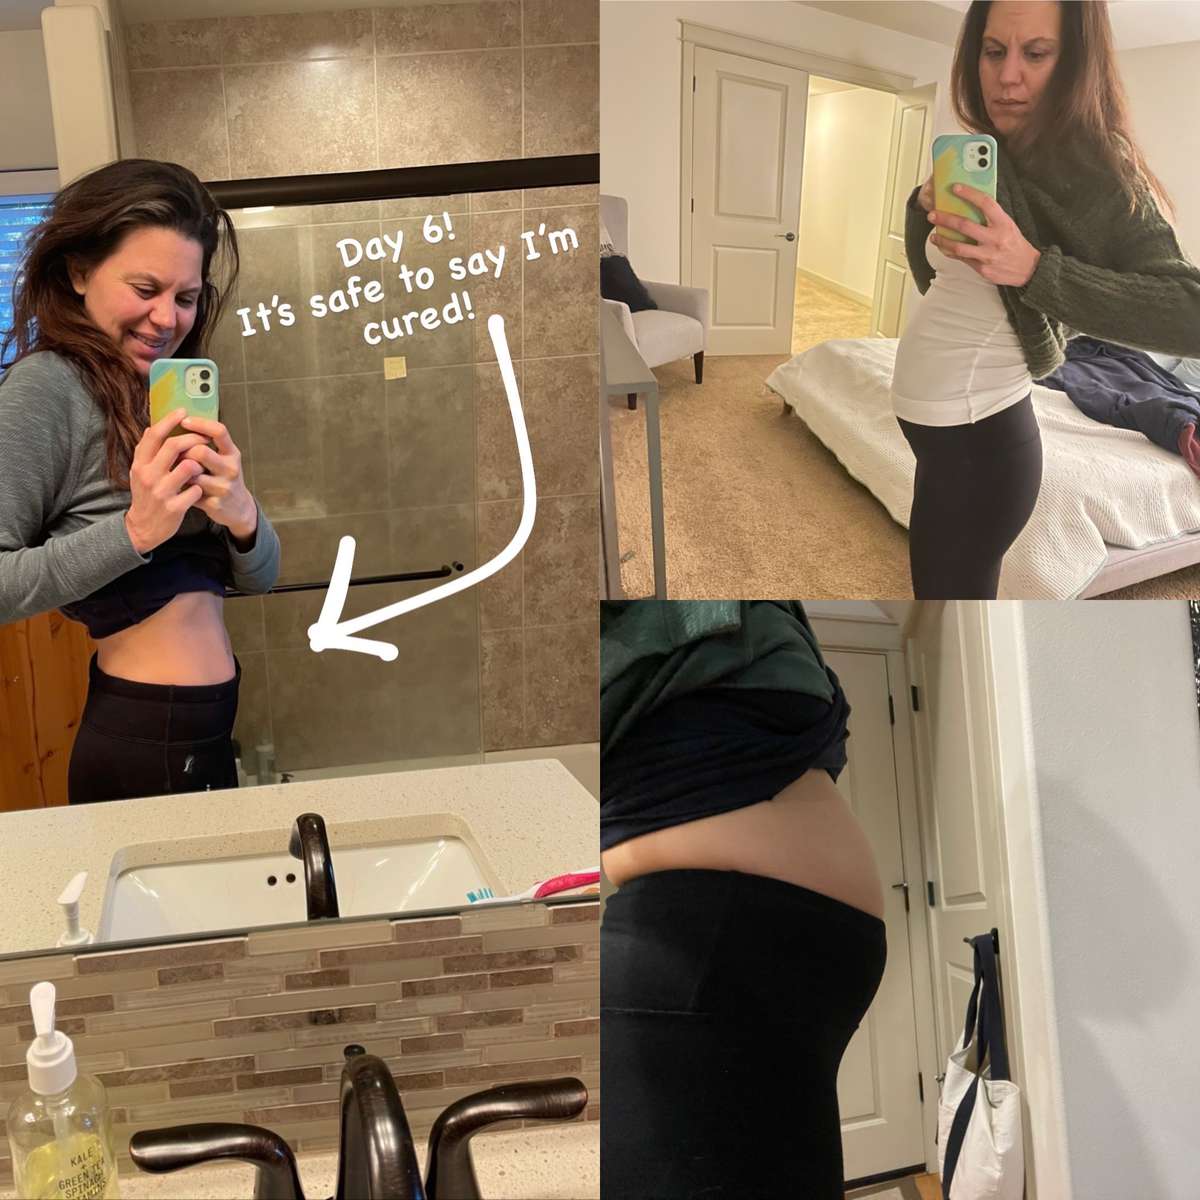 darleen carbonell recommends enema for bloated stomach pic